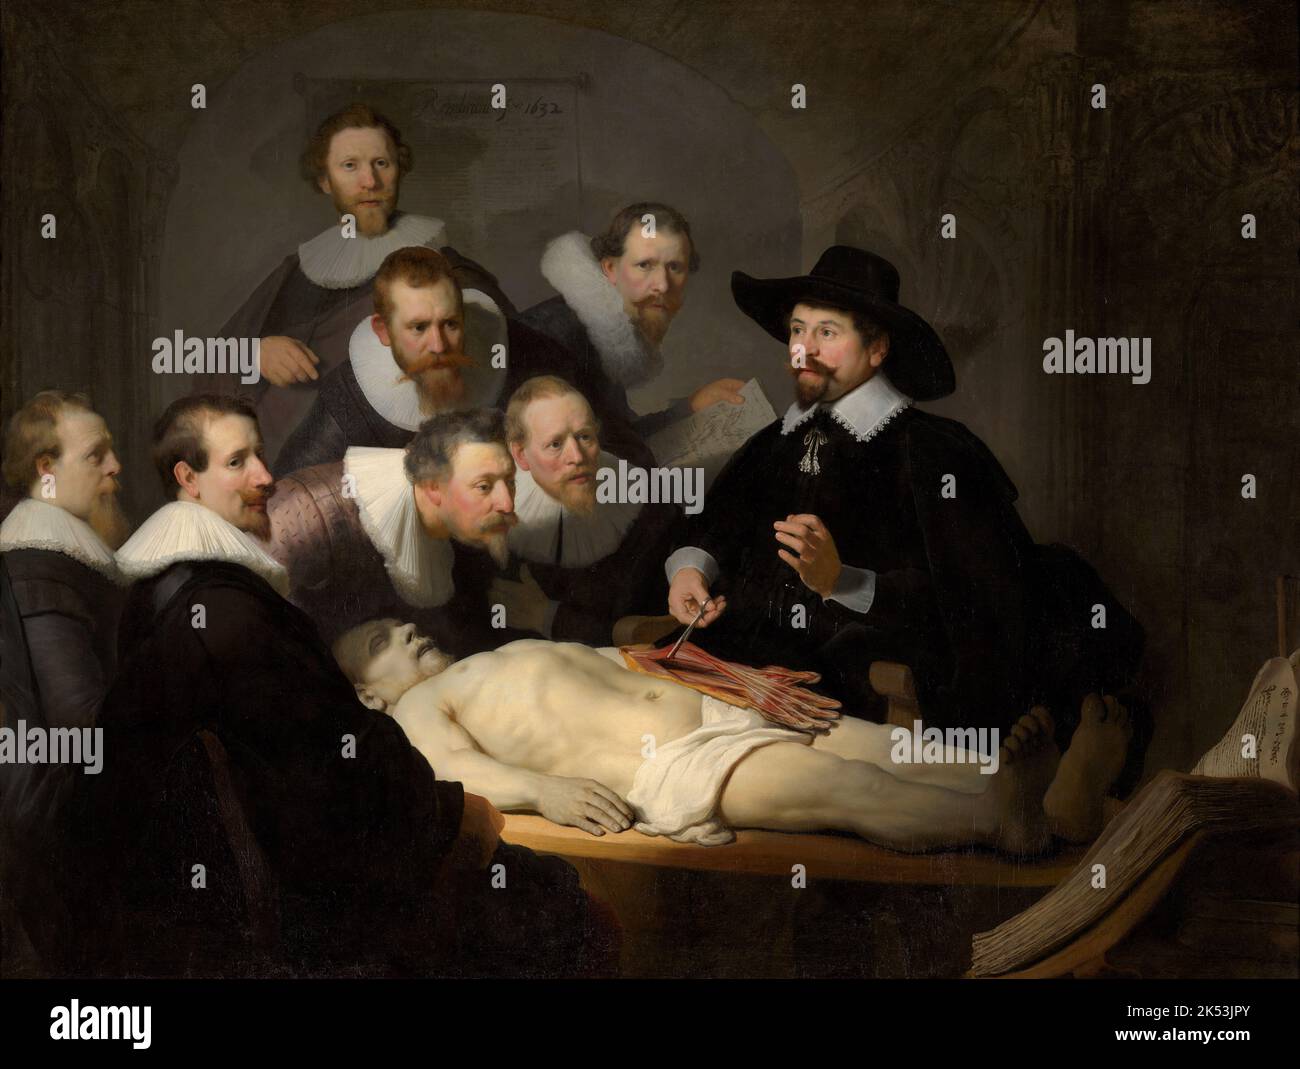 Anatomy Lesson of Dr. Nicolaes Tulp, 1632, Painting by Rembrandt Stock Photo